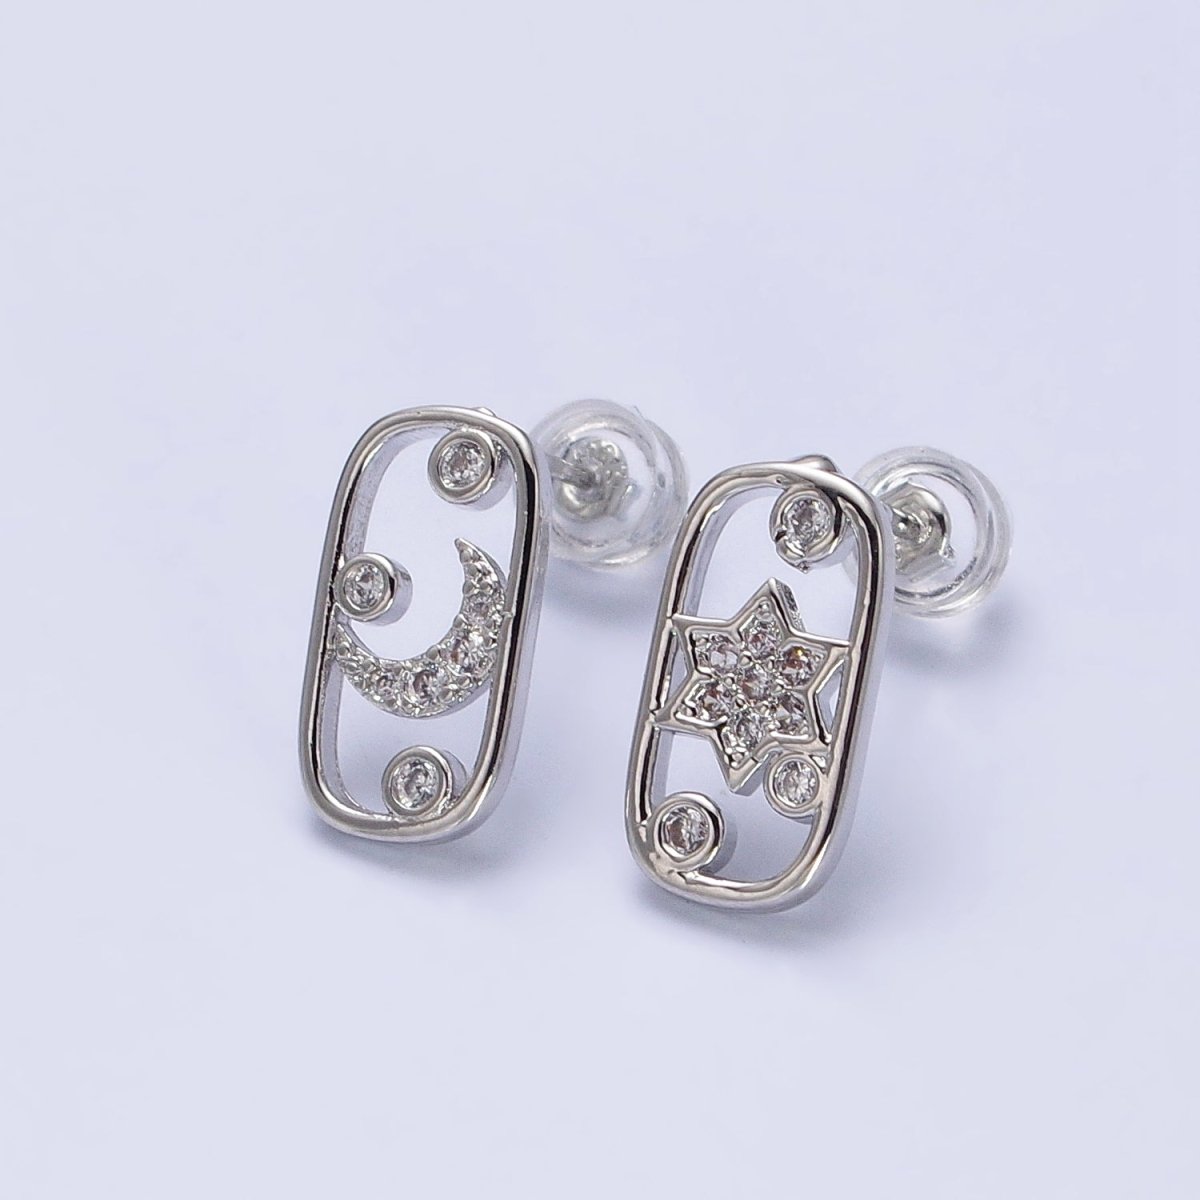 Gold, Silver Celestial Crescent Moon Star Rectangular Open Stud Earrings Mismatched Earrings | AB564 AB567 - DLUXCA